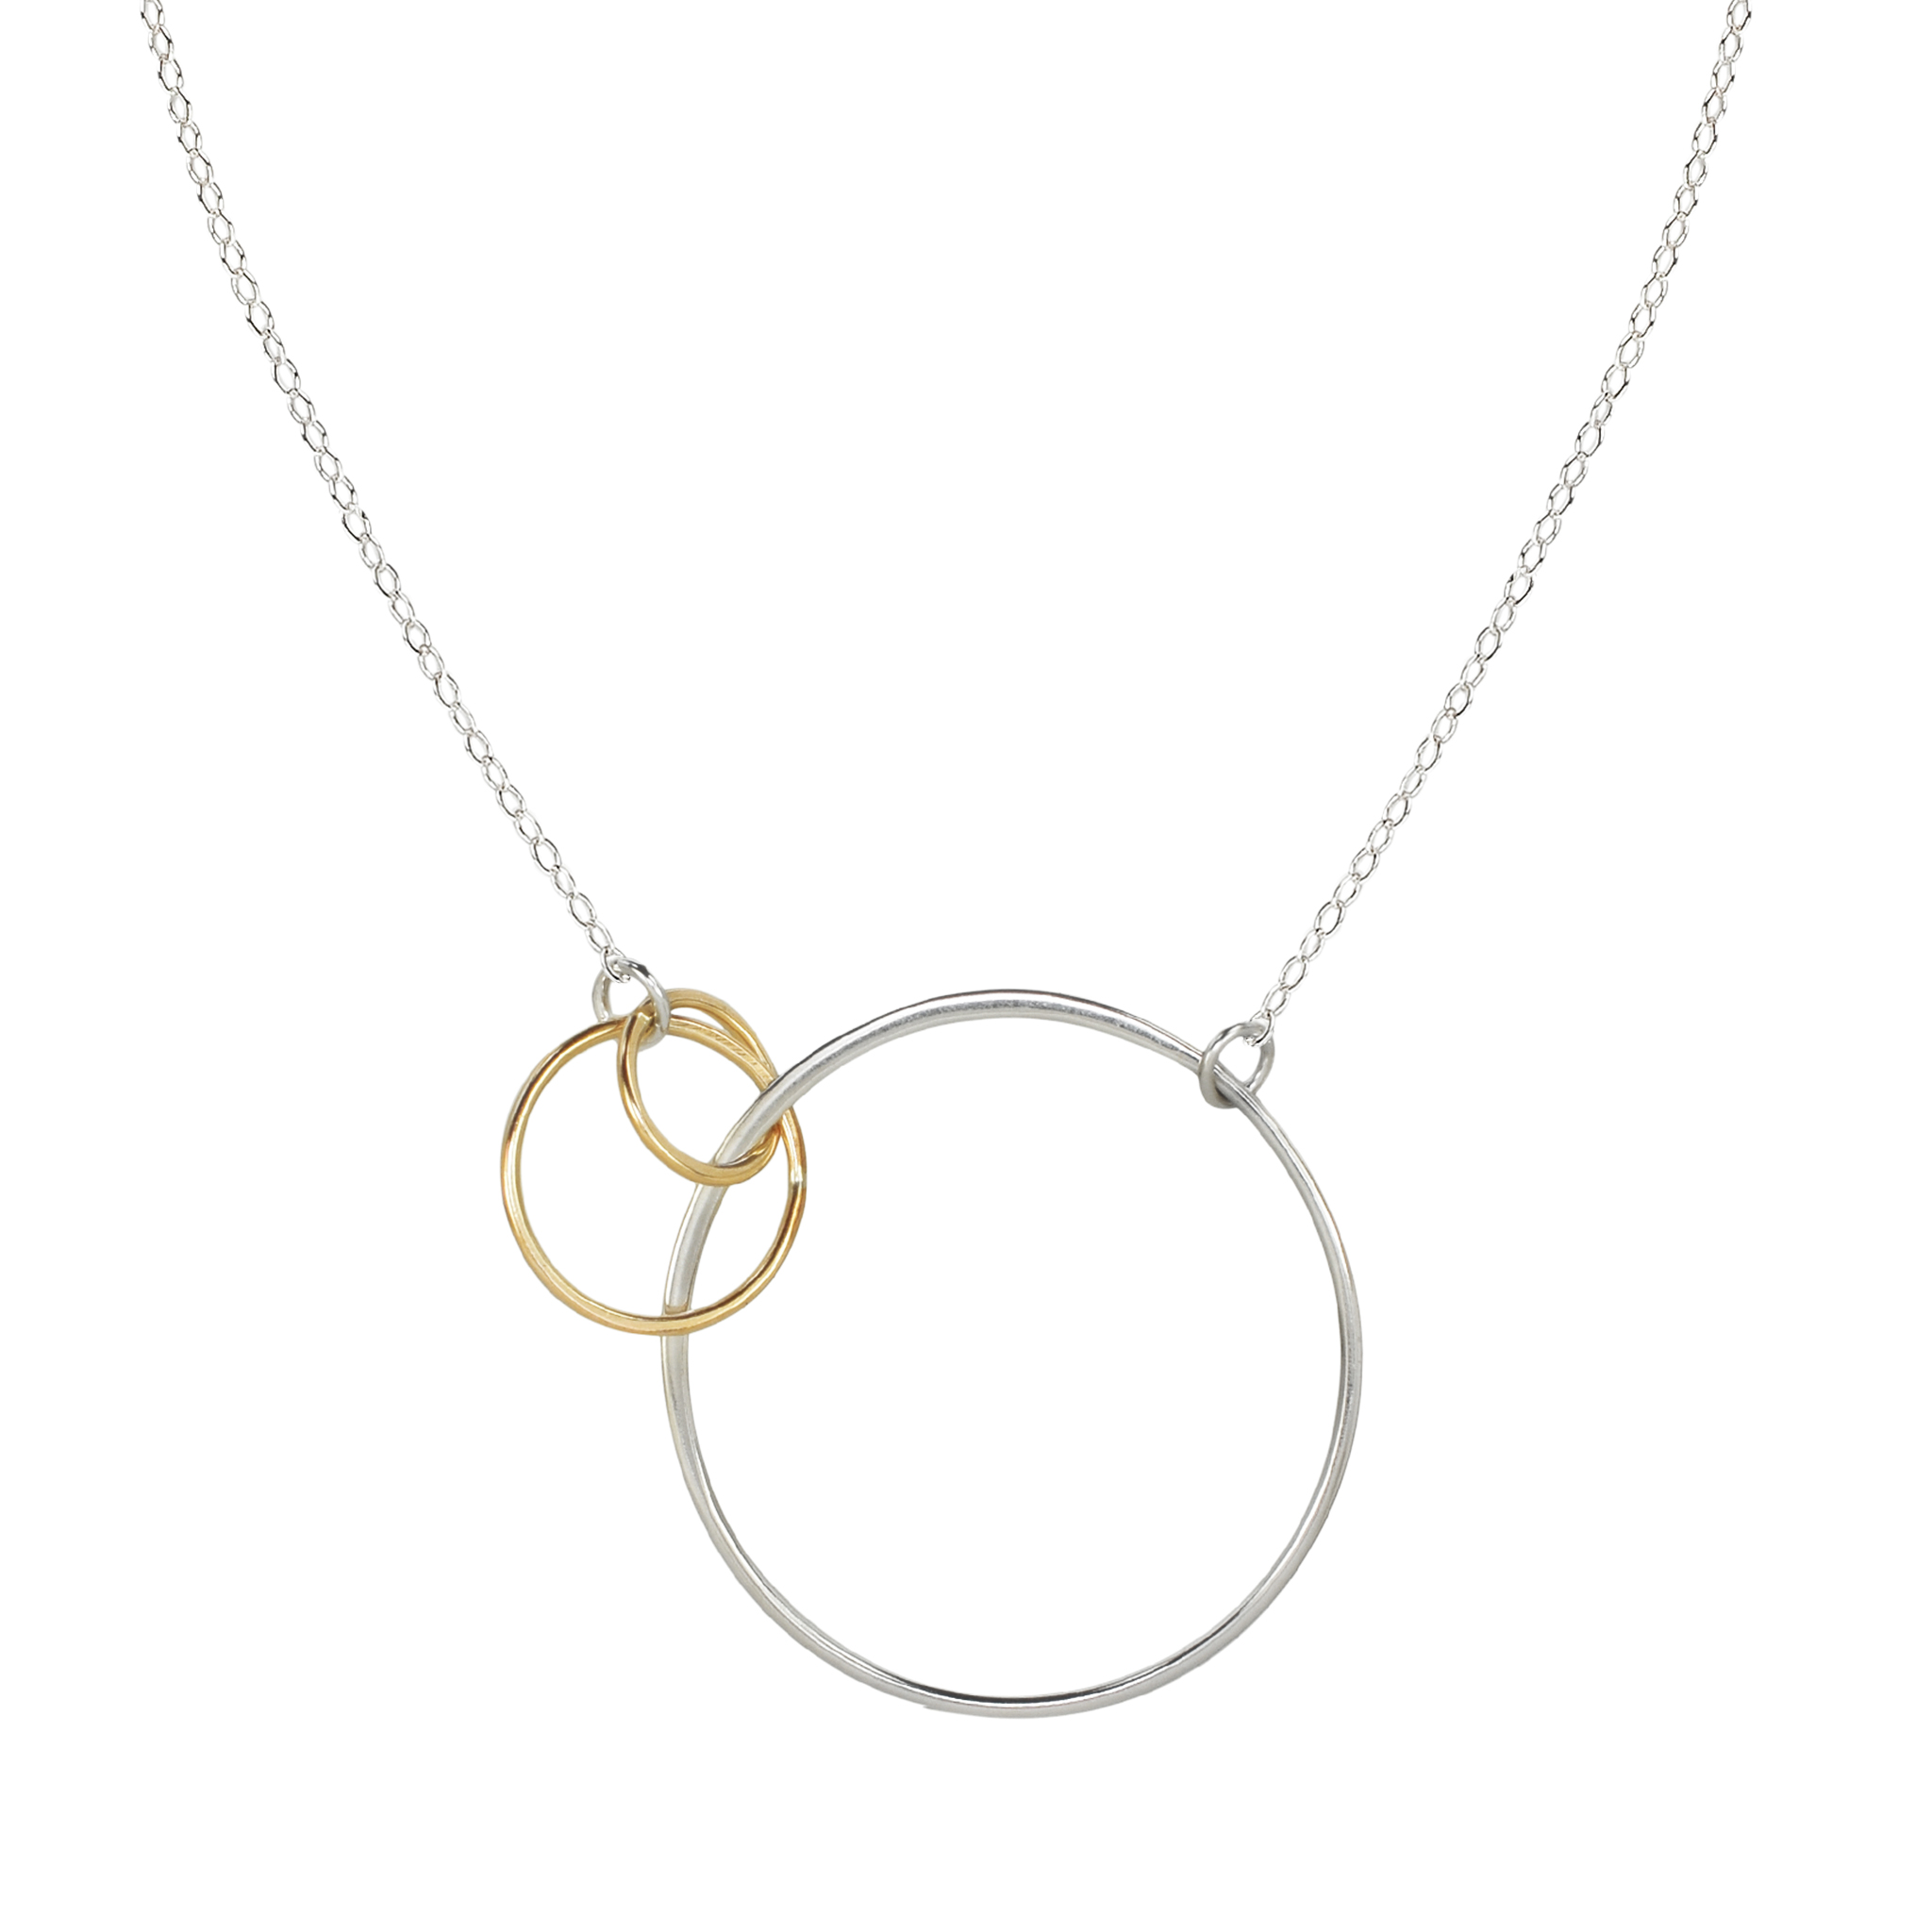 Linked Forever circles necklace in rose gold - Charli Bird